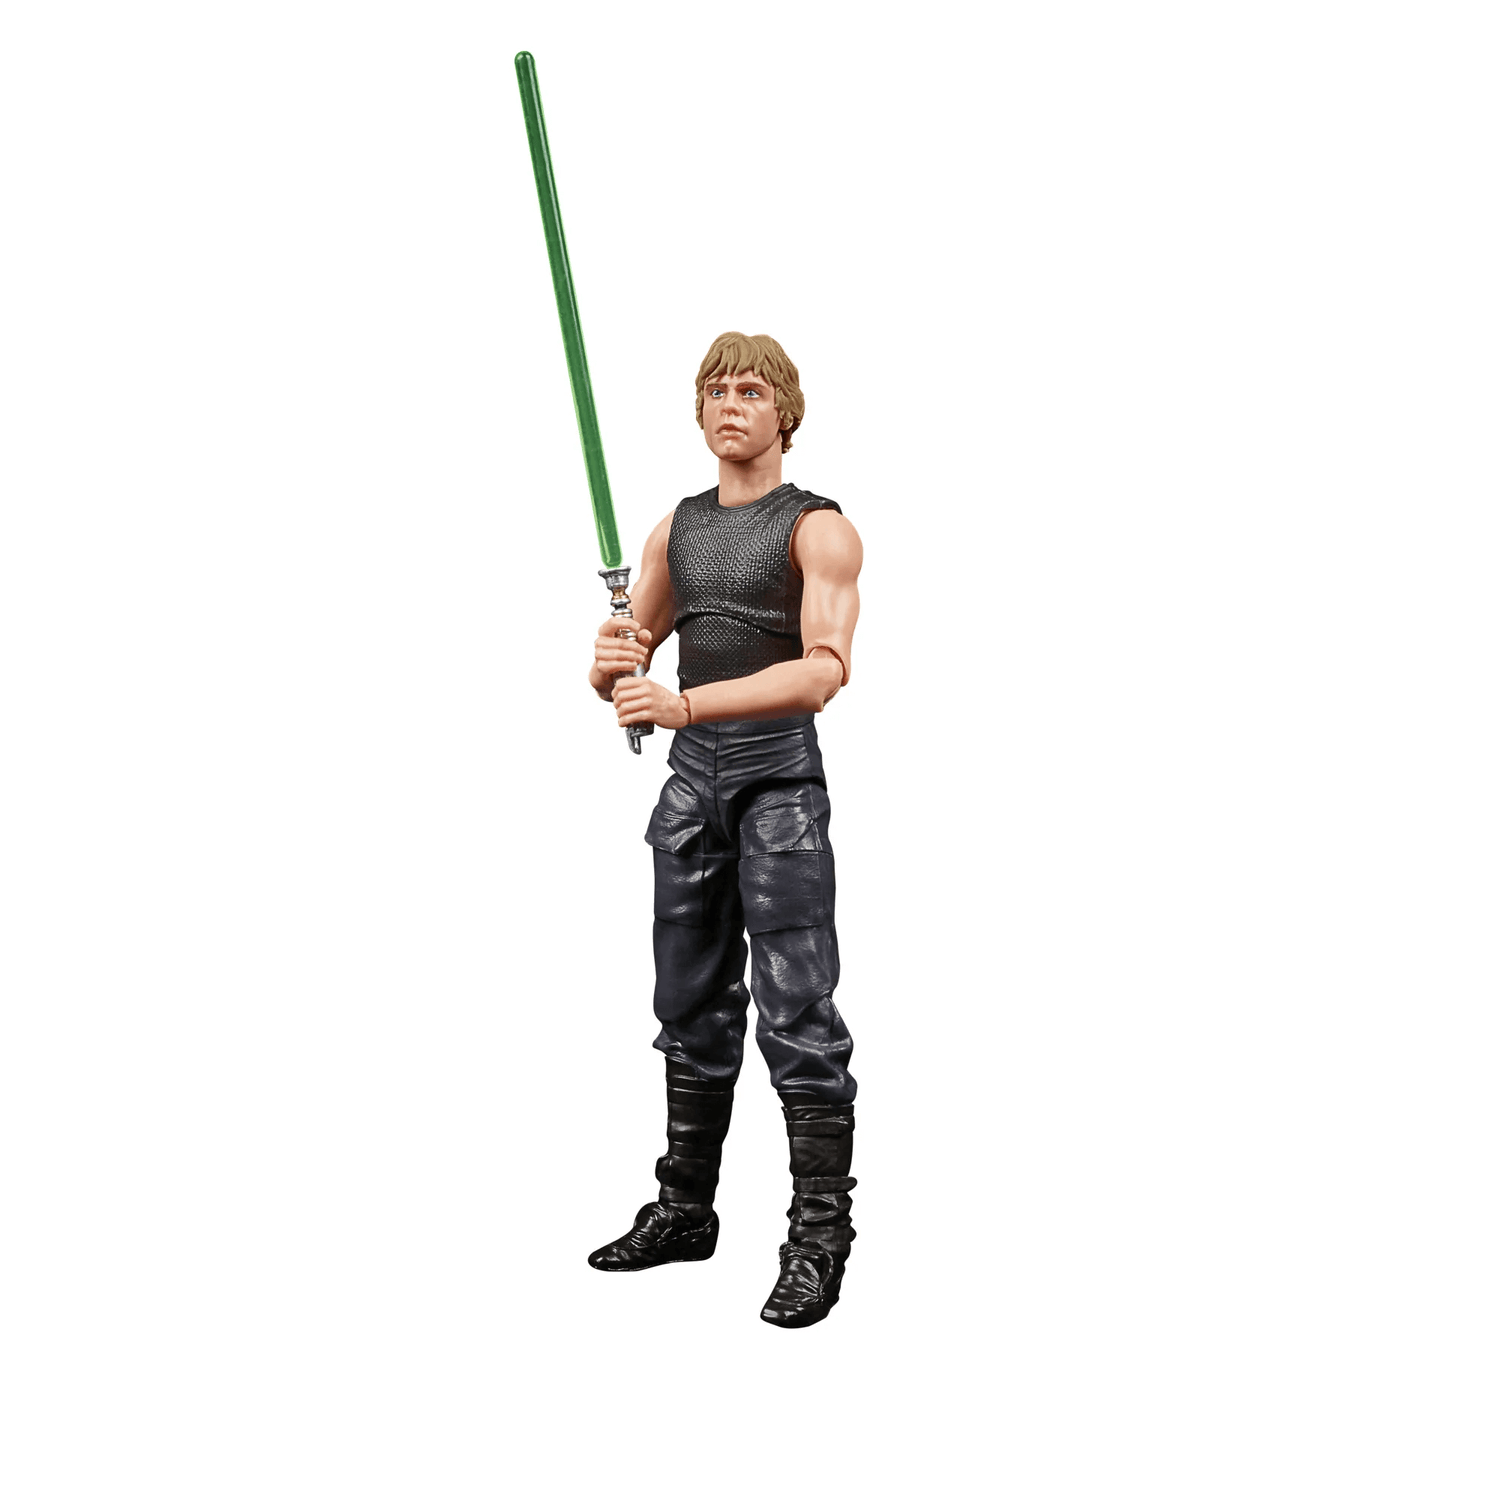 Hasbro Star Wars The Black Series Luke Skywalker (Heir to the Empire) action figure with lightsaber